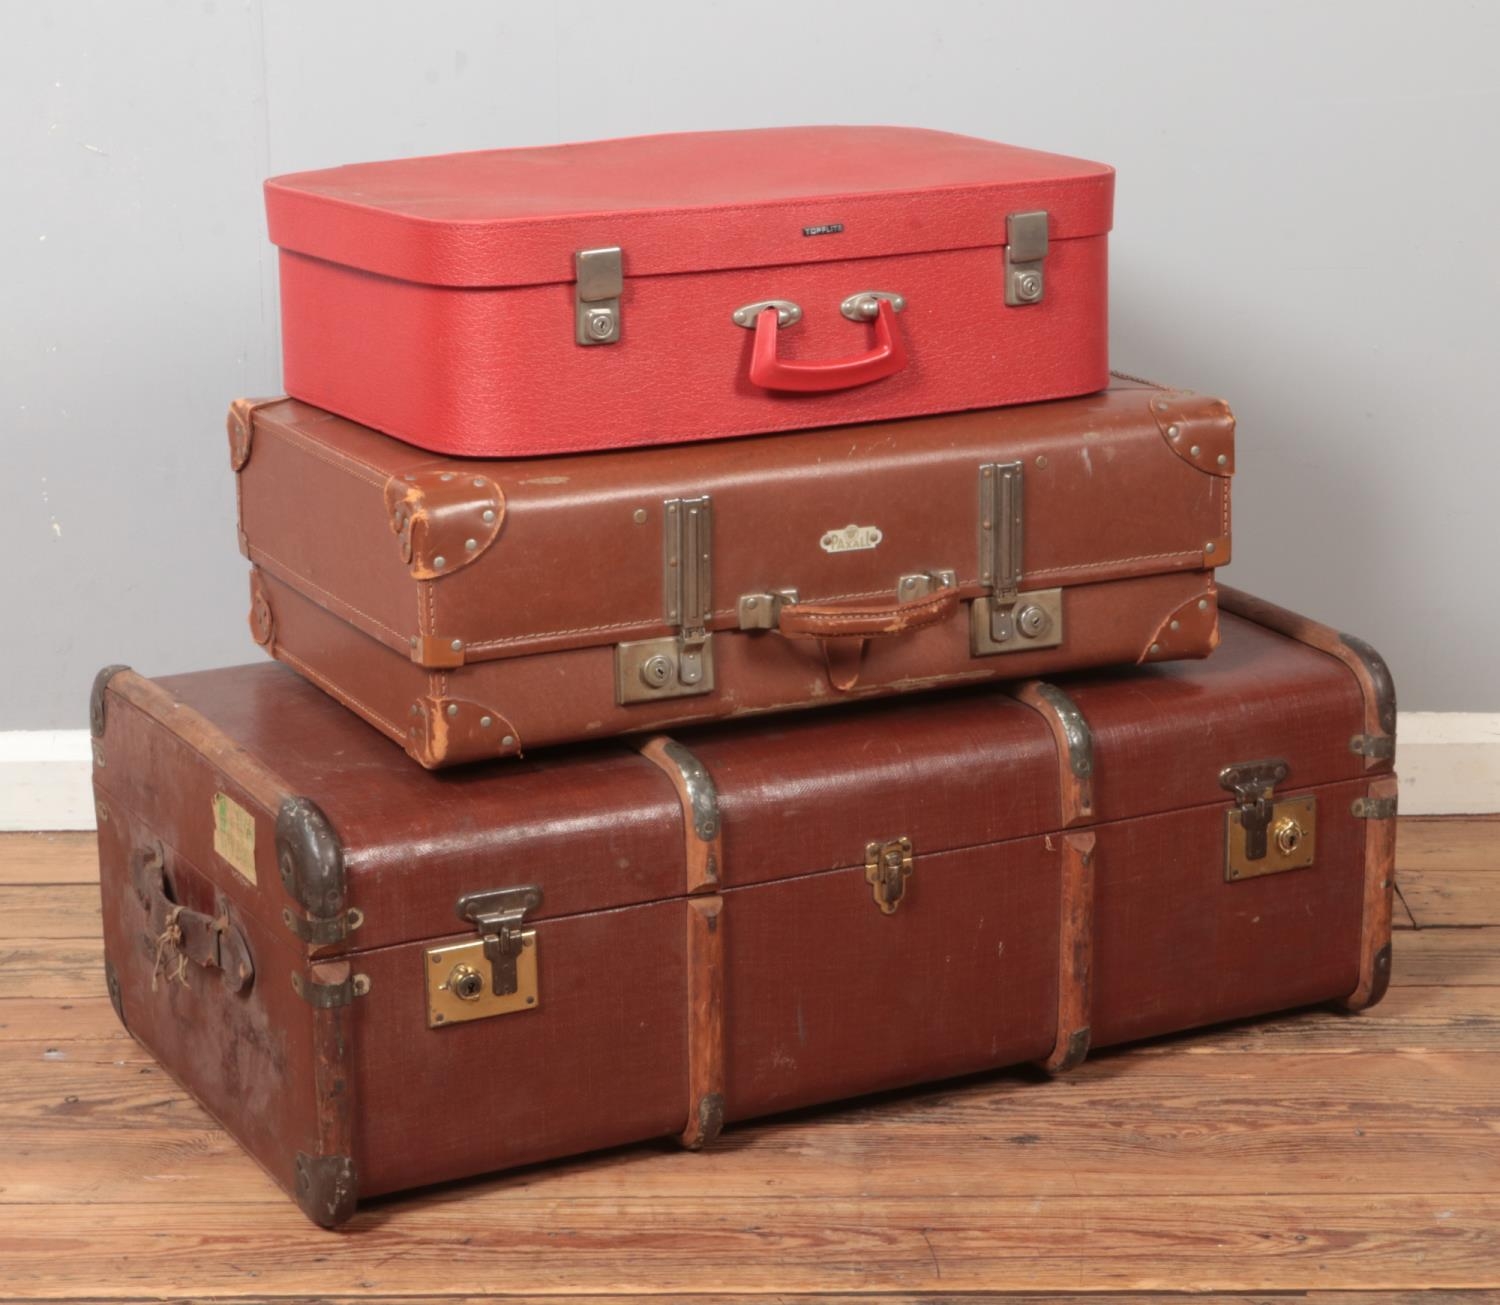 Two vintage suitcases; Paxall and Topflite, together with a wooden bound travel trunk.